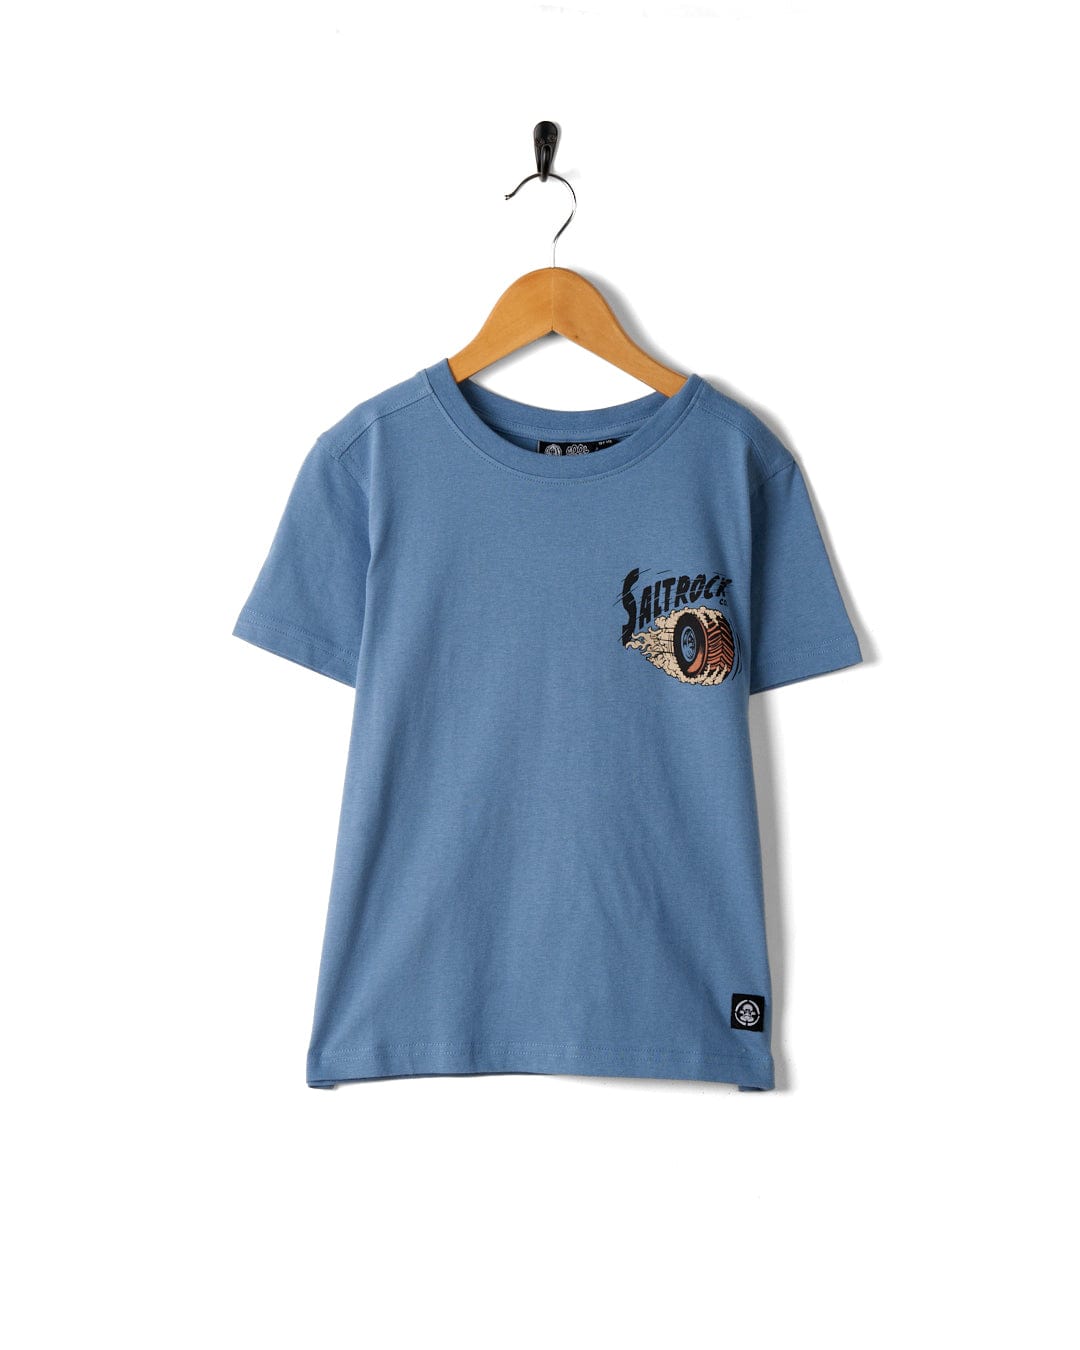 A blue Saltrock t-shirt with an image of an elephant on it.